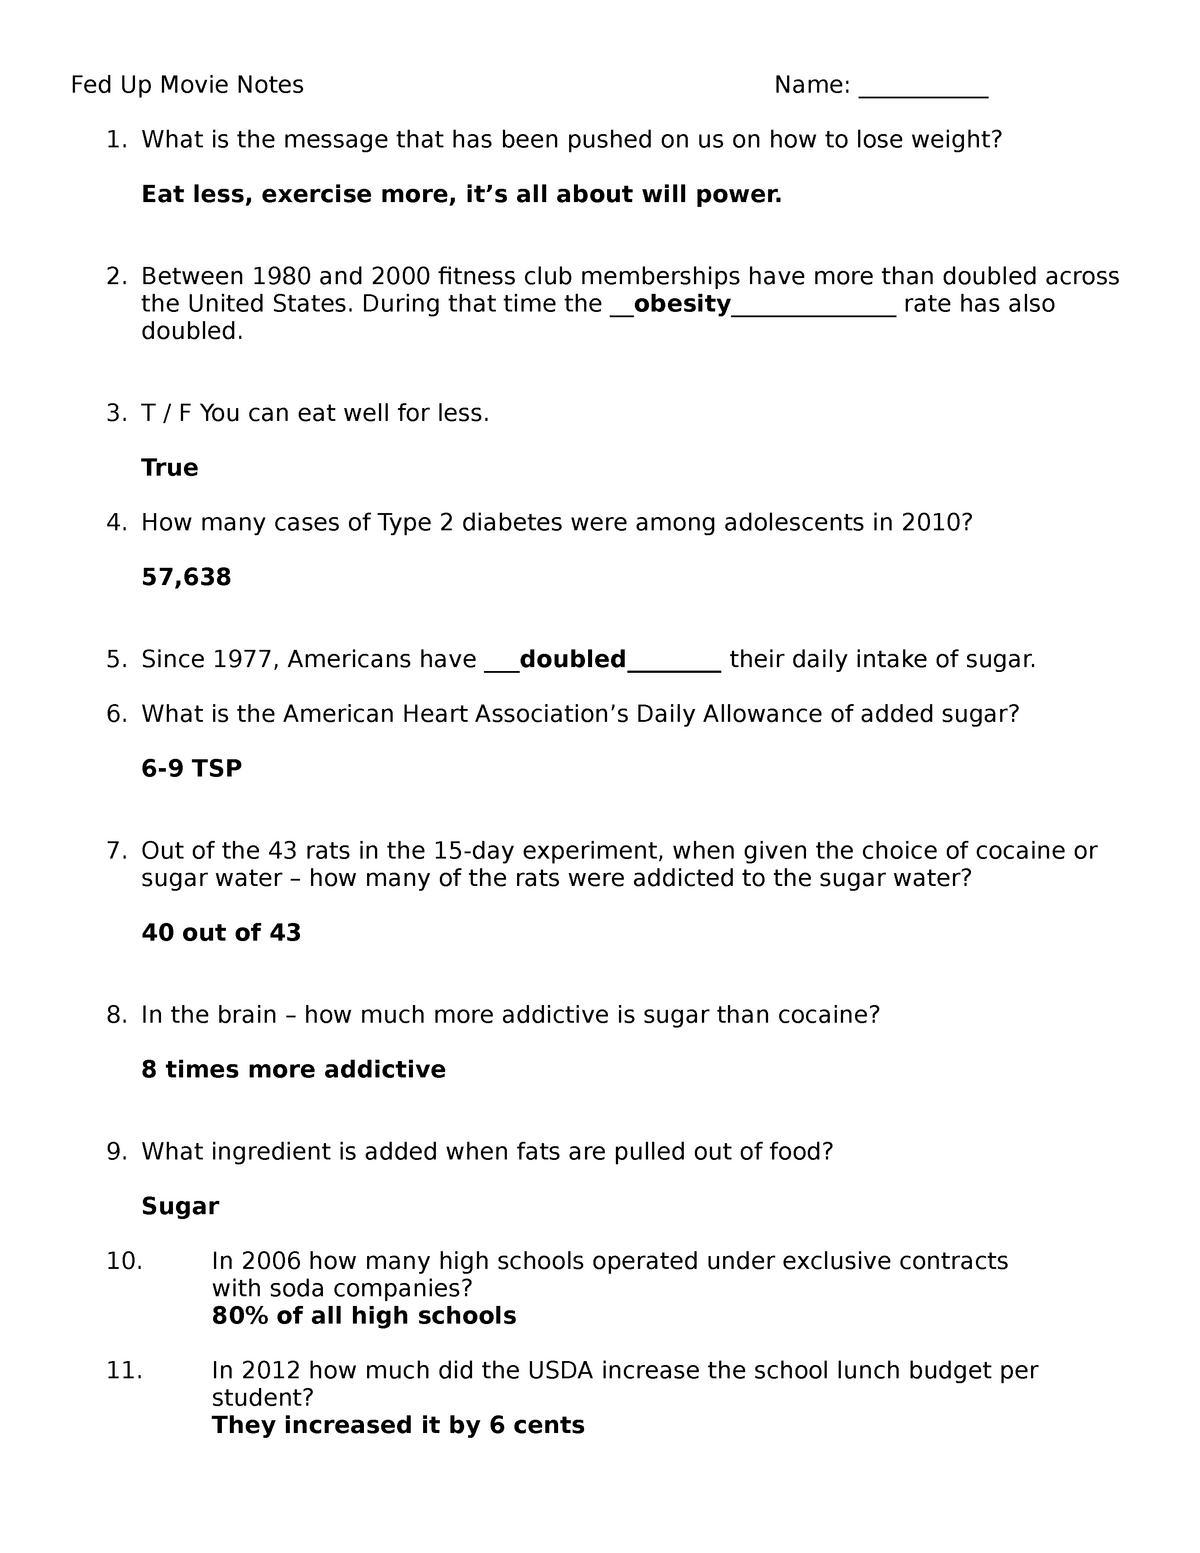 Fed-Up Movie Lecture Note Answer Questions - NUTR 21 - StuDocu Within Fed Up Worksheet Answer Key